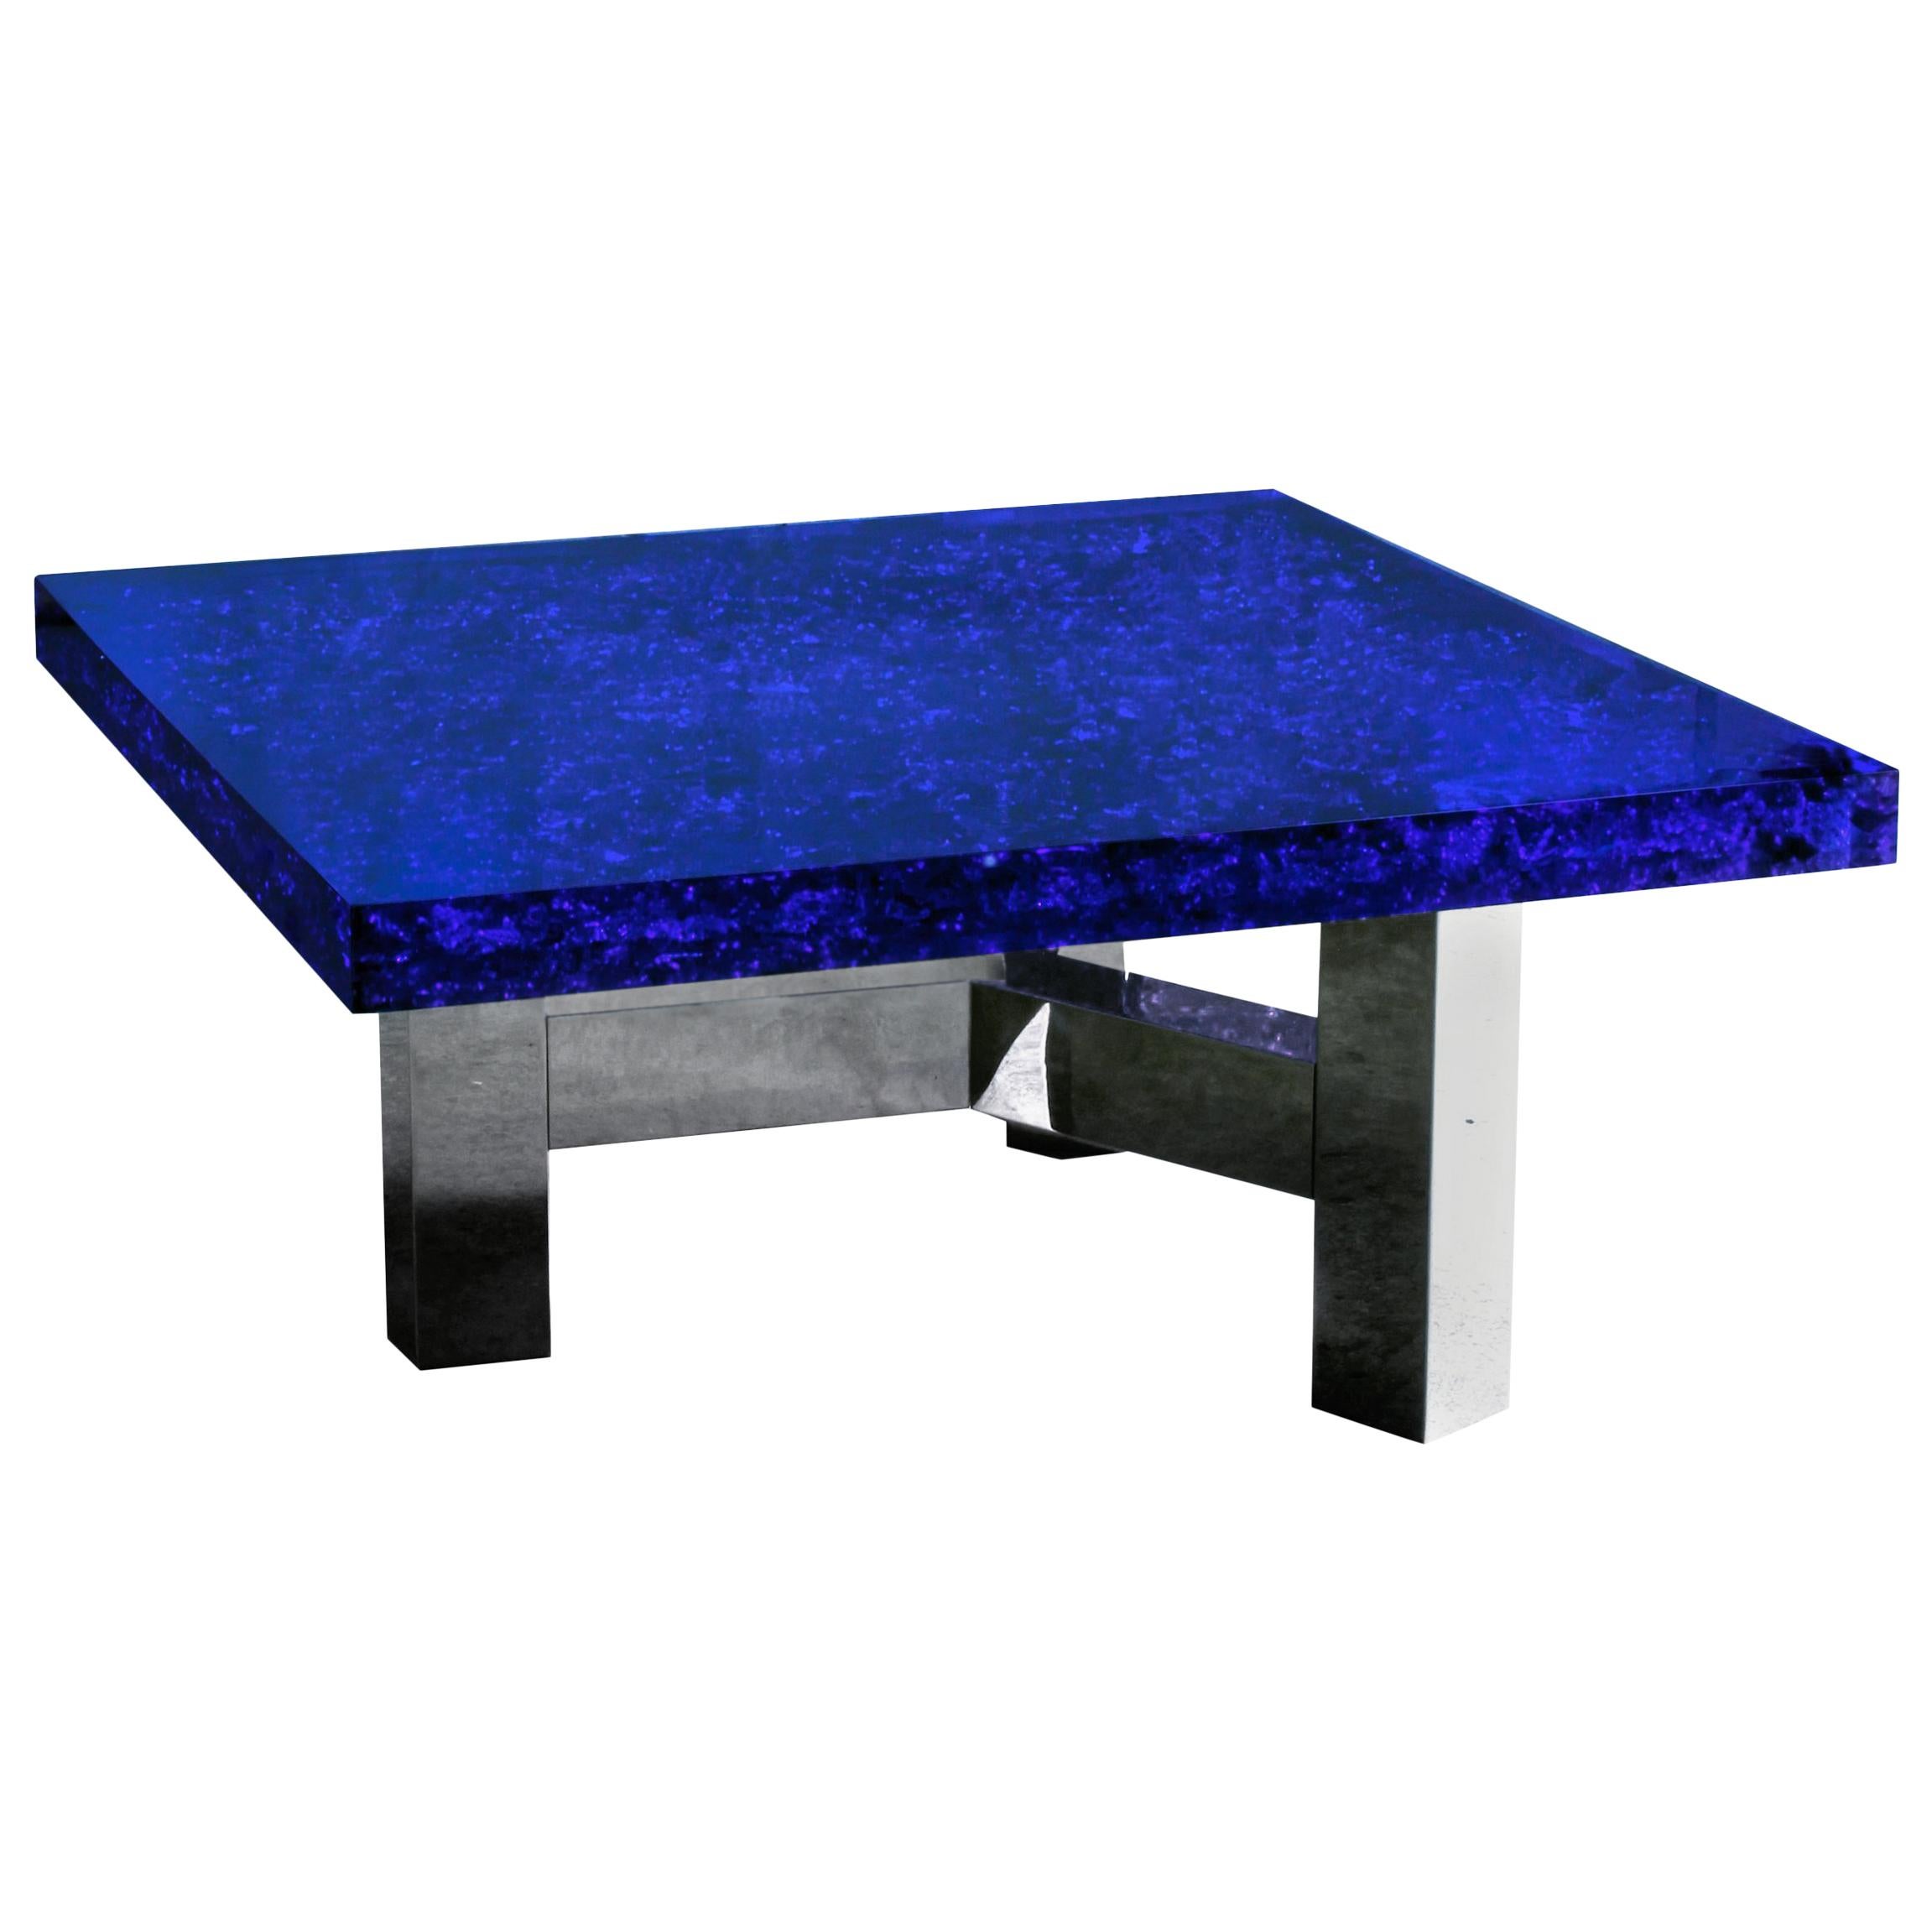 Blue Lucite and Murano Glass Coffee Table Nickel-Plated Brass Base "Riflessioni" For Sale